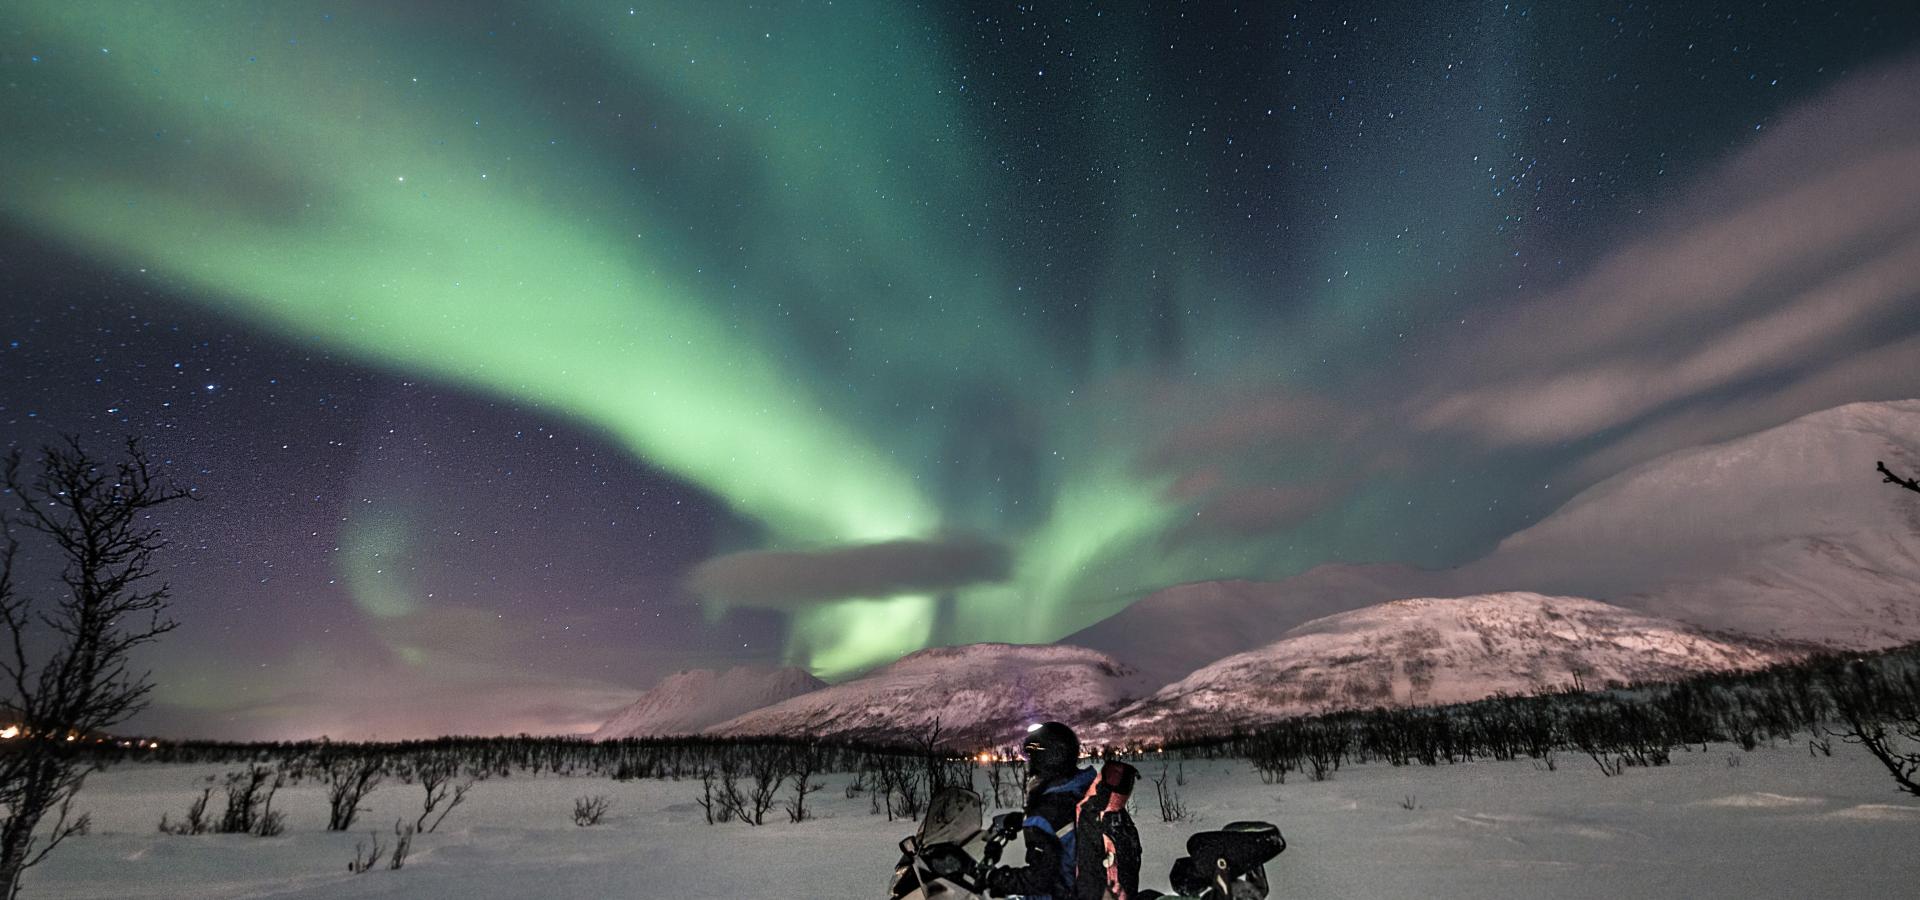 Snowmobiling under the northern lights in the Lyngen Alps, Northern Norway